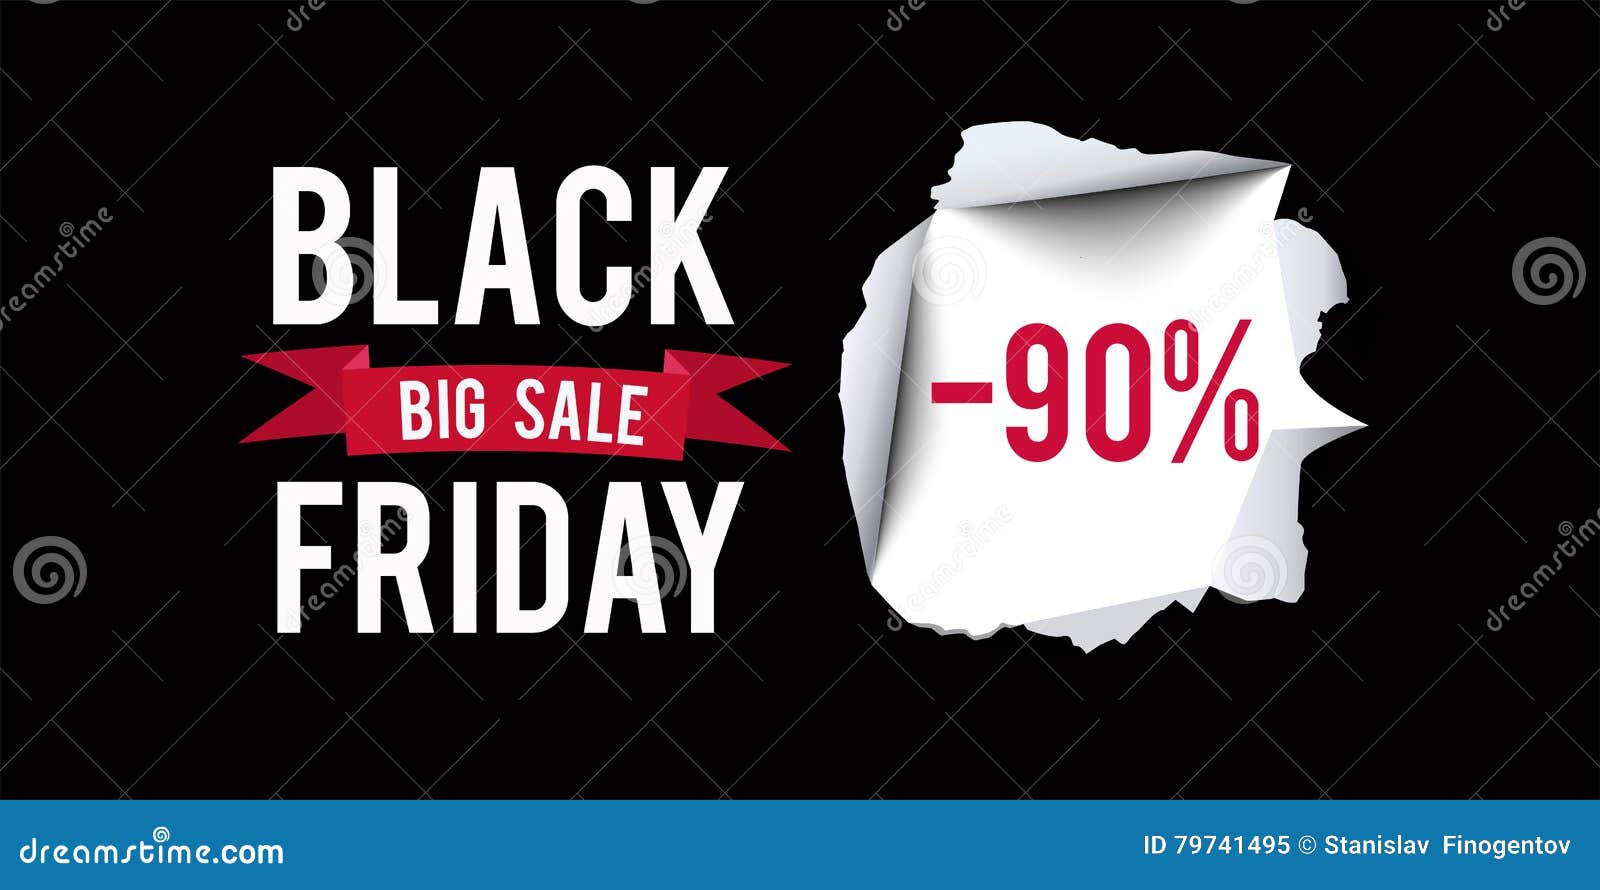 black friday sale  template. black friday 90 percent discount banner with black background.  .